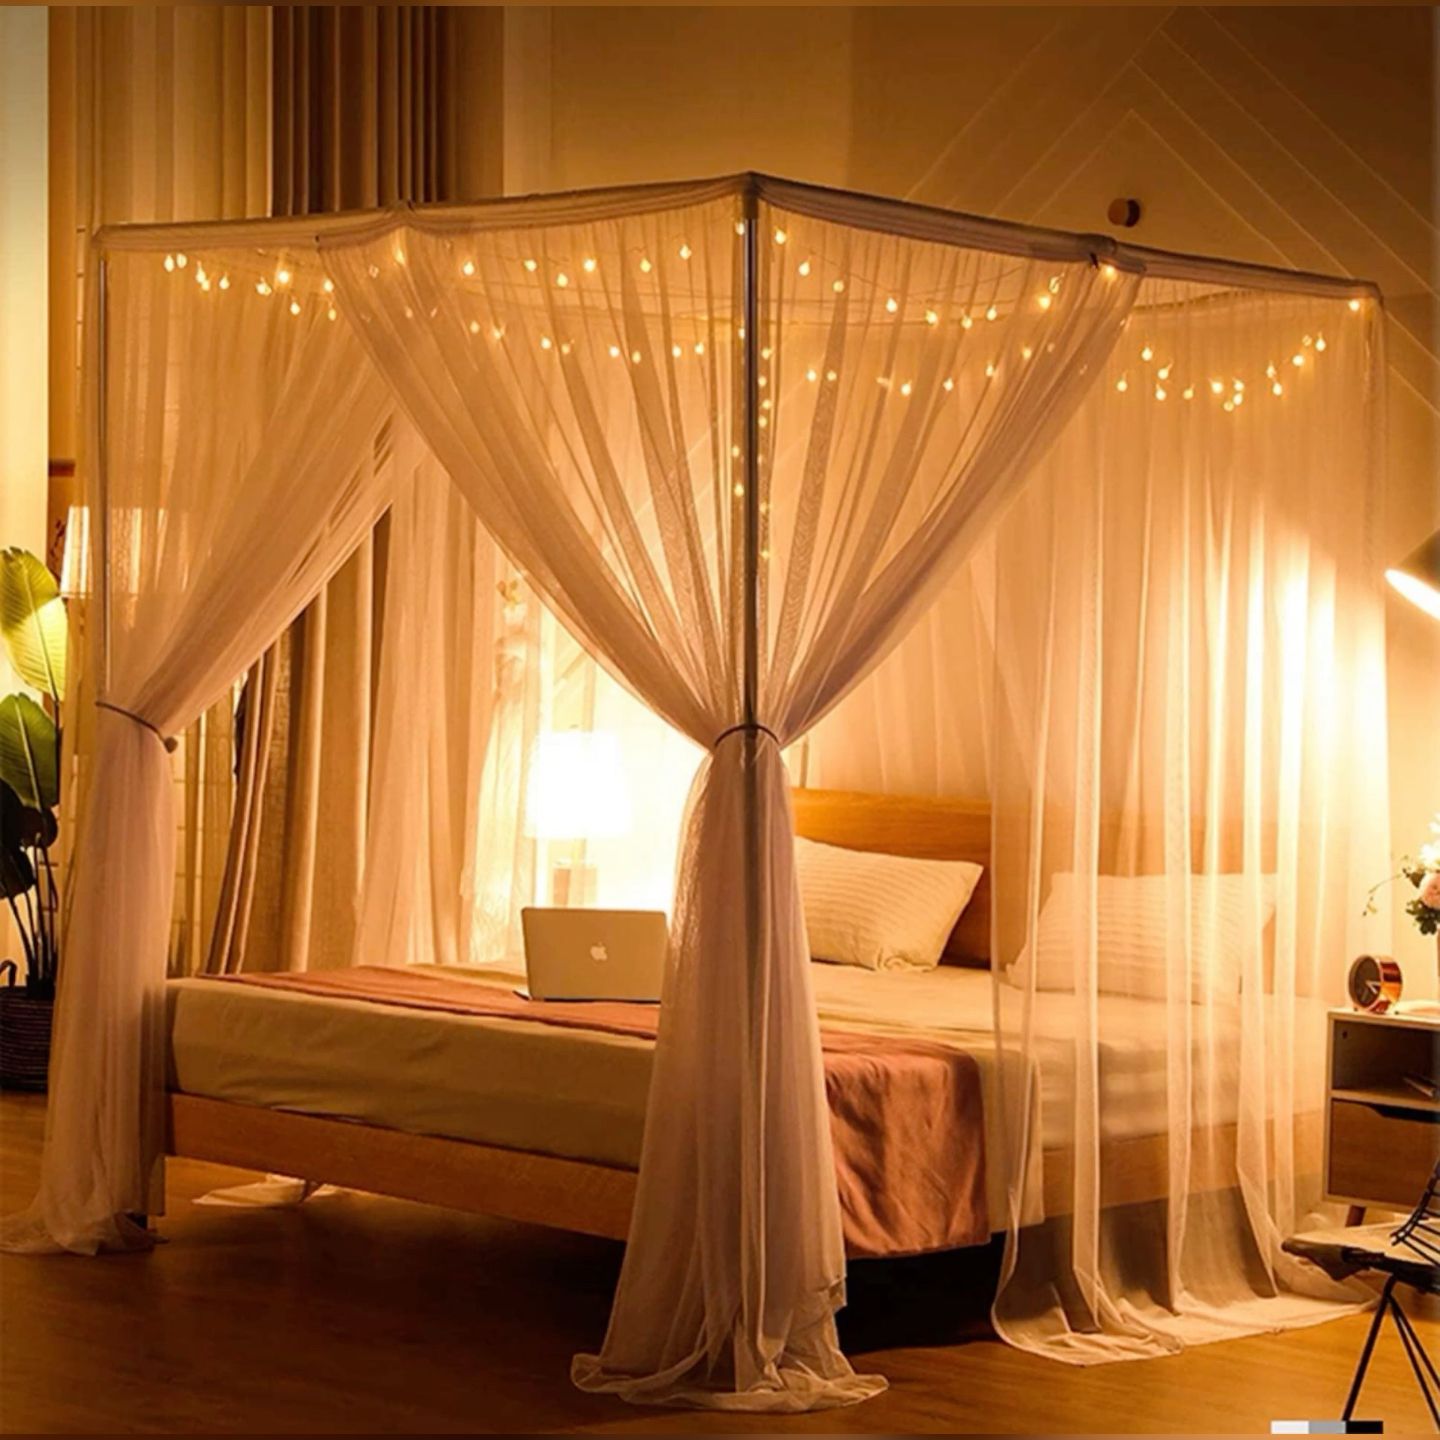 Experience Luxury and Elegance with a Queen Size Canopy Bed